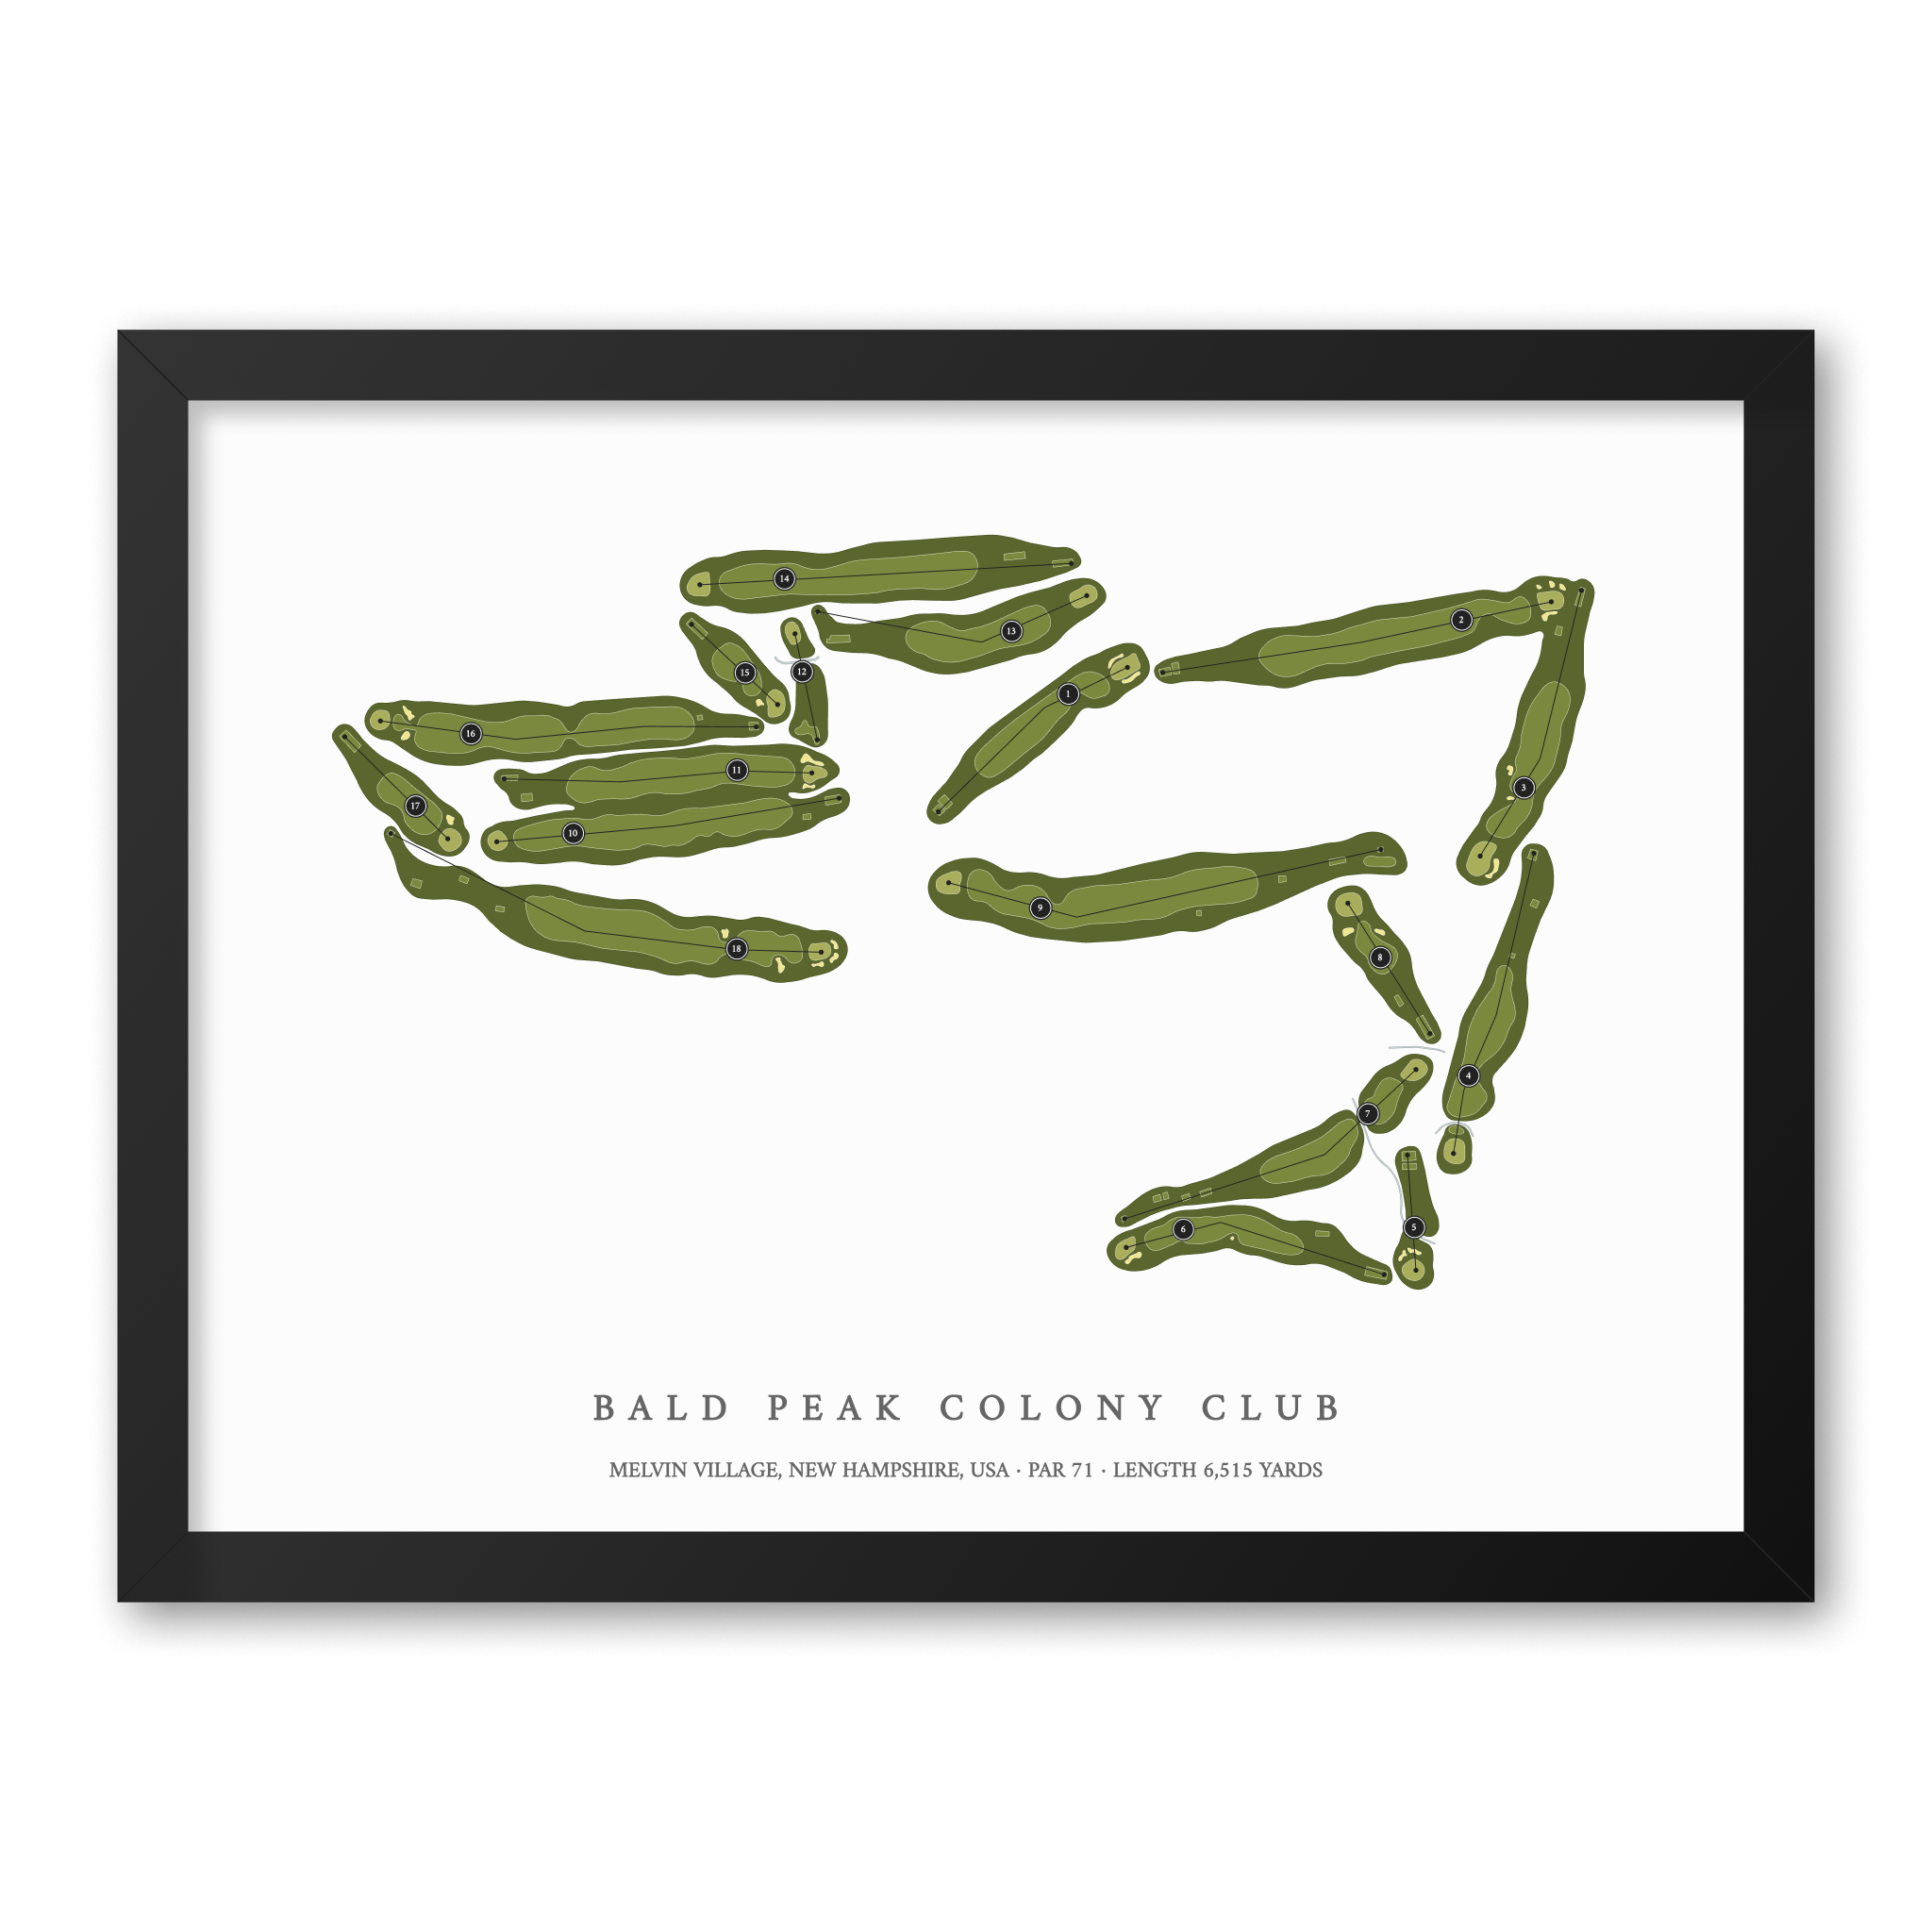 Bald Peak Colony Club | Golf Course Map | Black Frame With Hole Numbers #hole numbers_yes